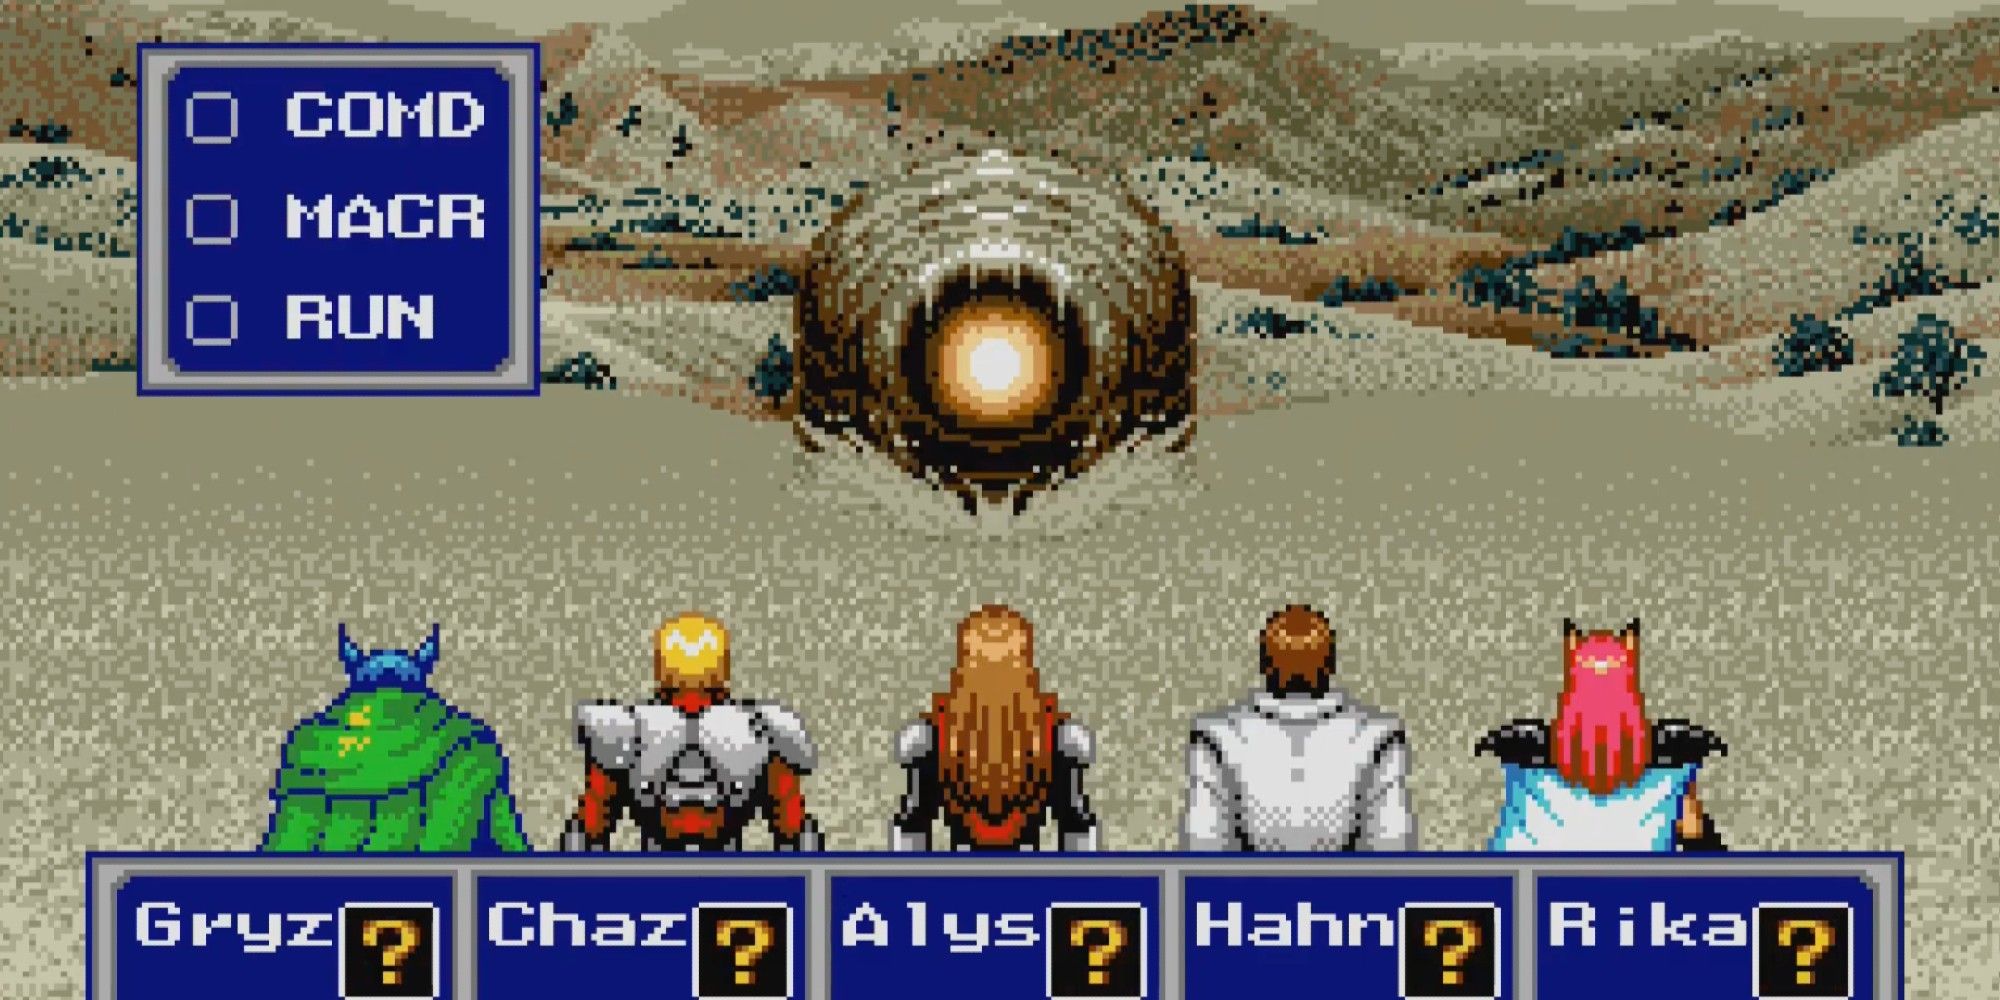 Fighting A Sandworm in Phantasy Star 4:The End of the Millennium